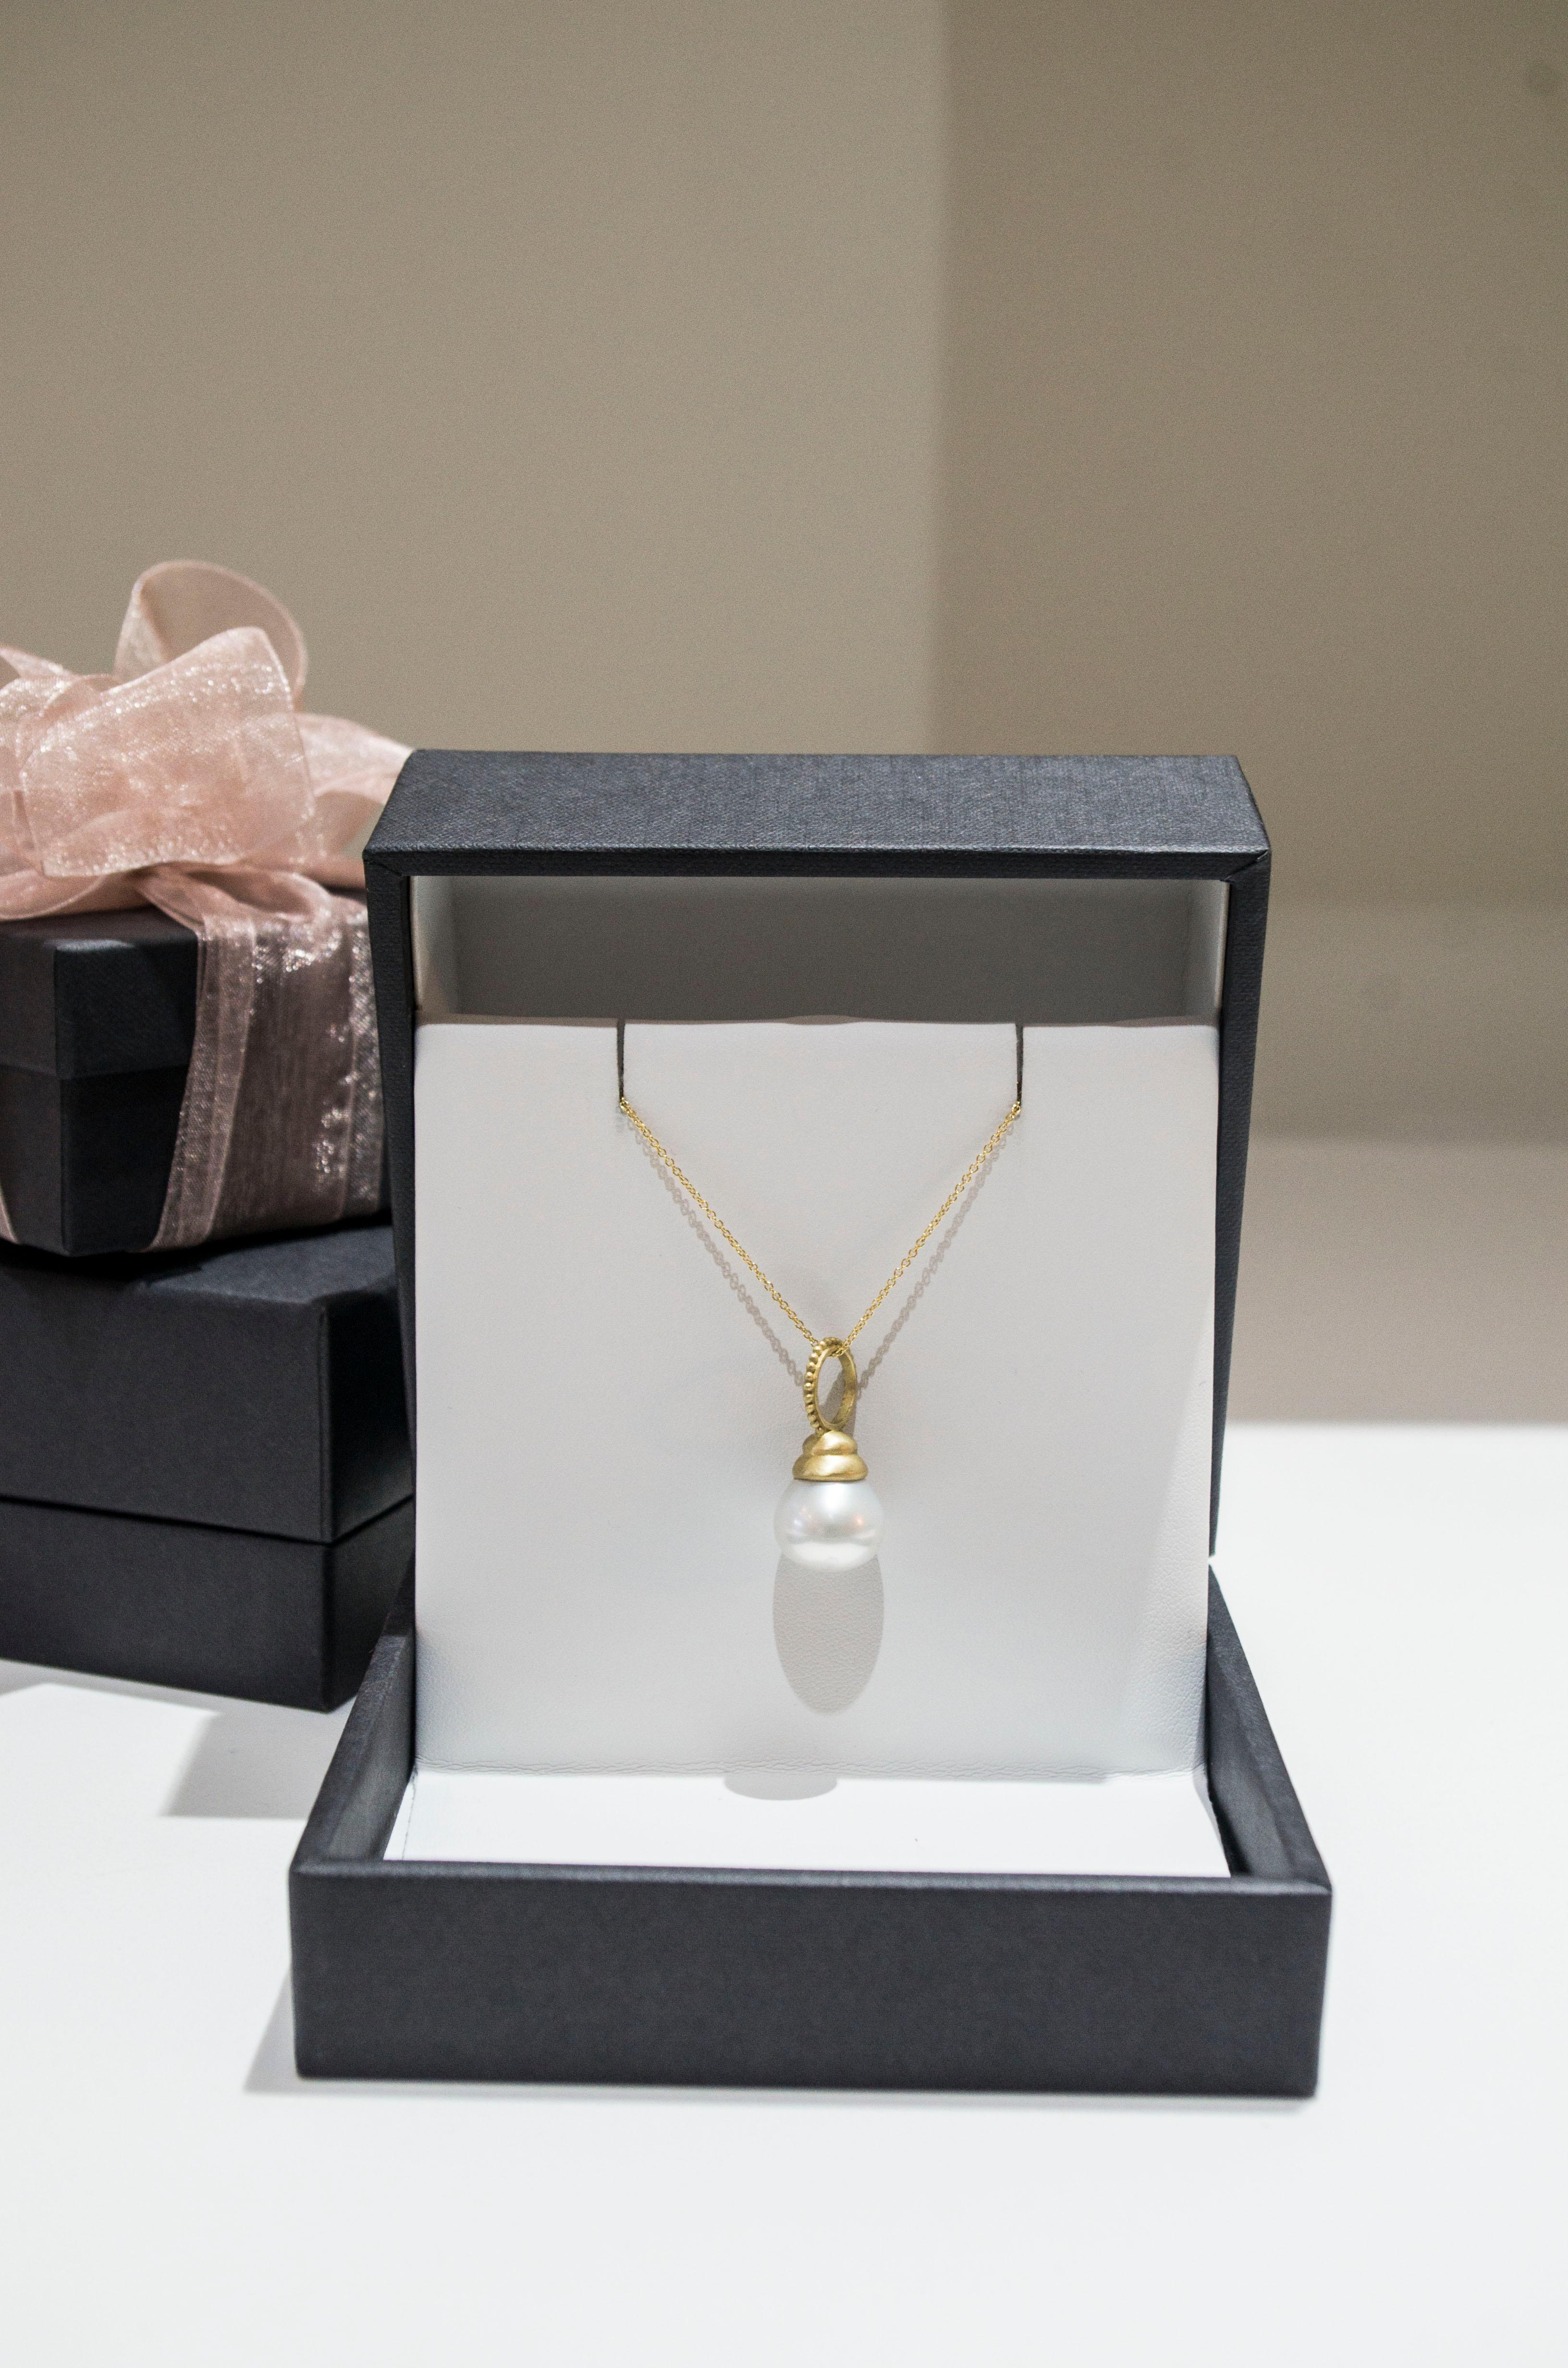 White South Sea Cultured Pearl Drop Pendant finished with an 18k Gold Cap. In Faye Kim's signature 18k Green* gold and granulation bail, the traditional pearl drop is transformed to a modern and fresh design for today's contemporary style. Can be